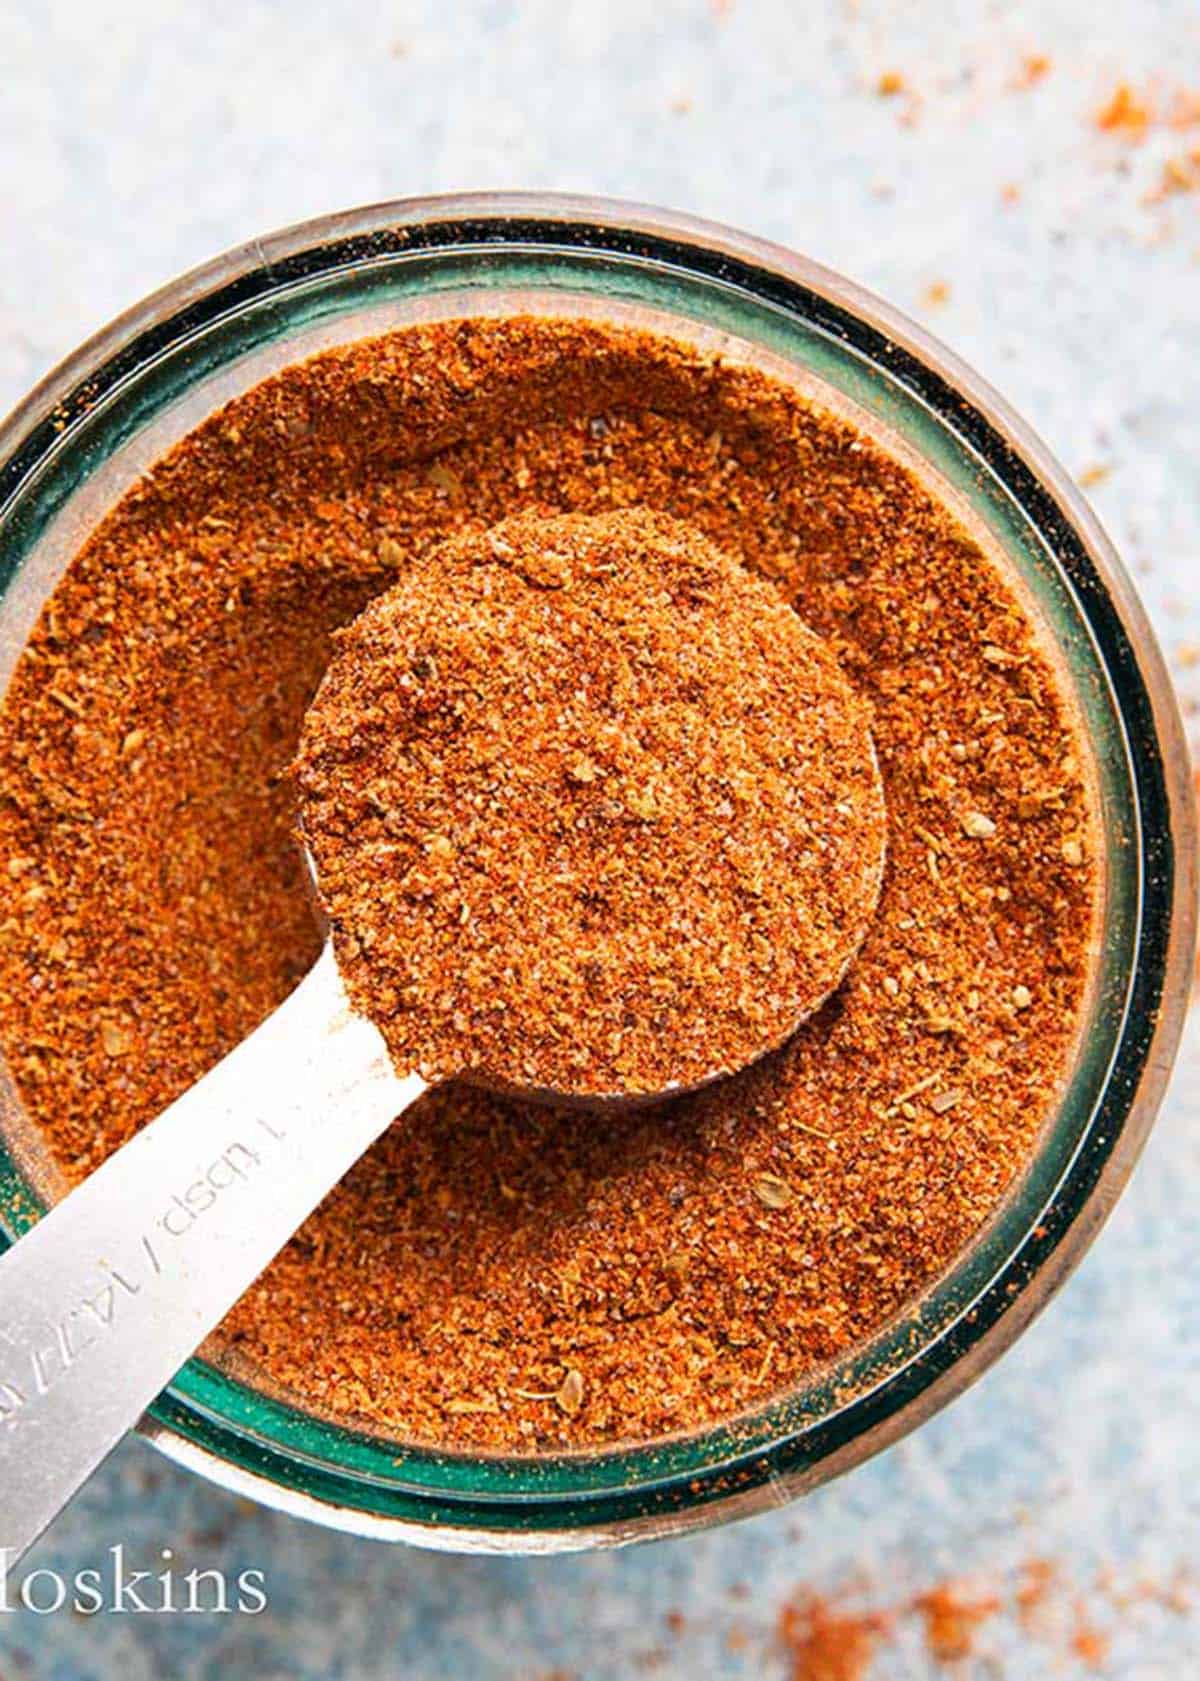 red colored ground spices in a glass jar along with a tablespoon.